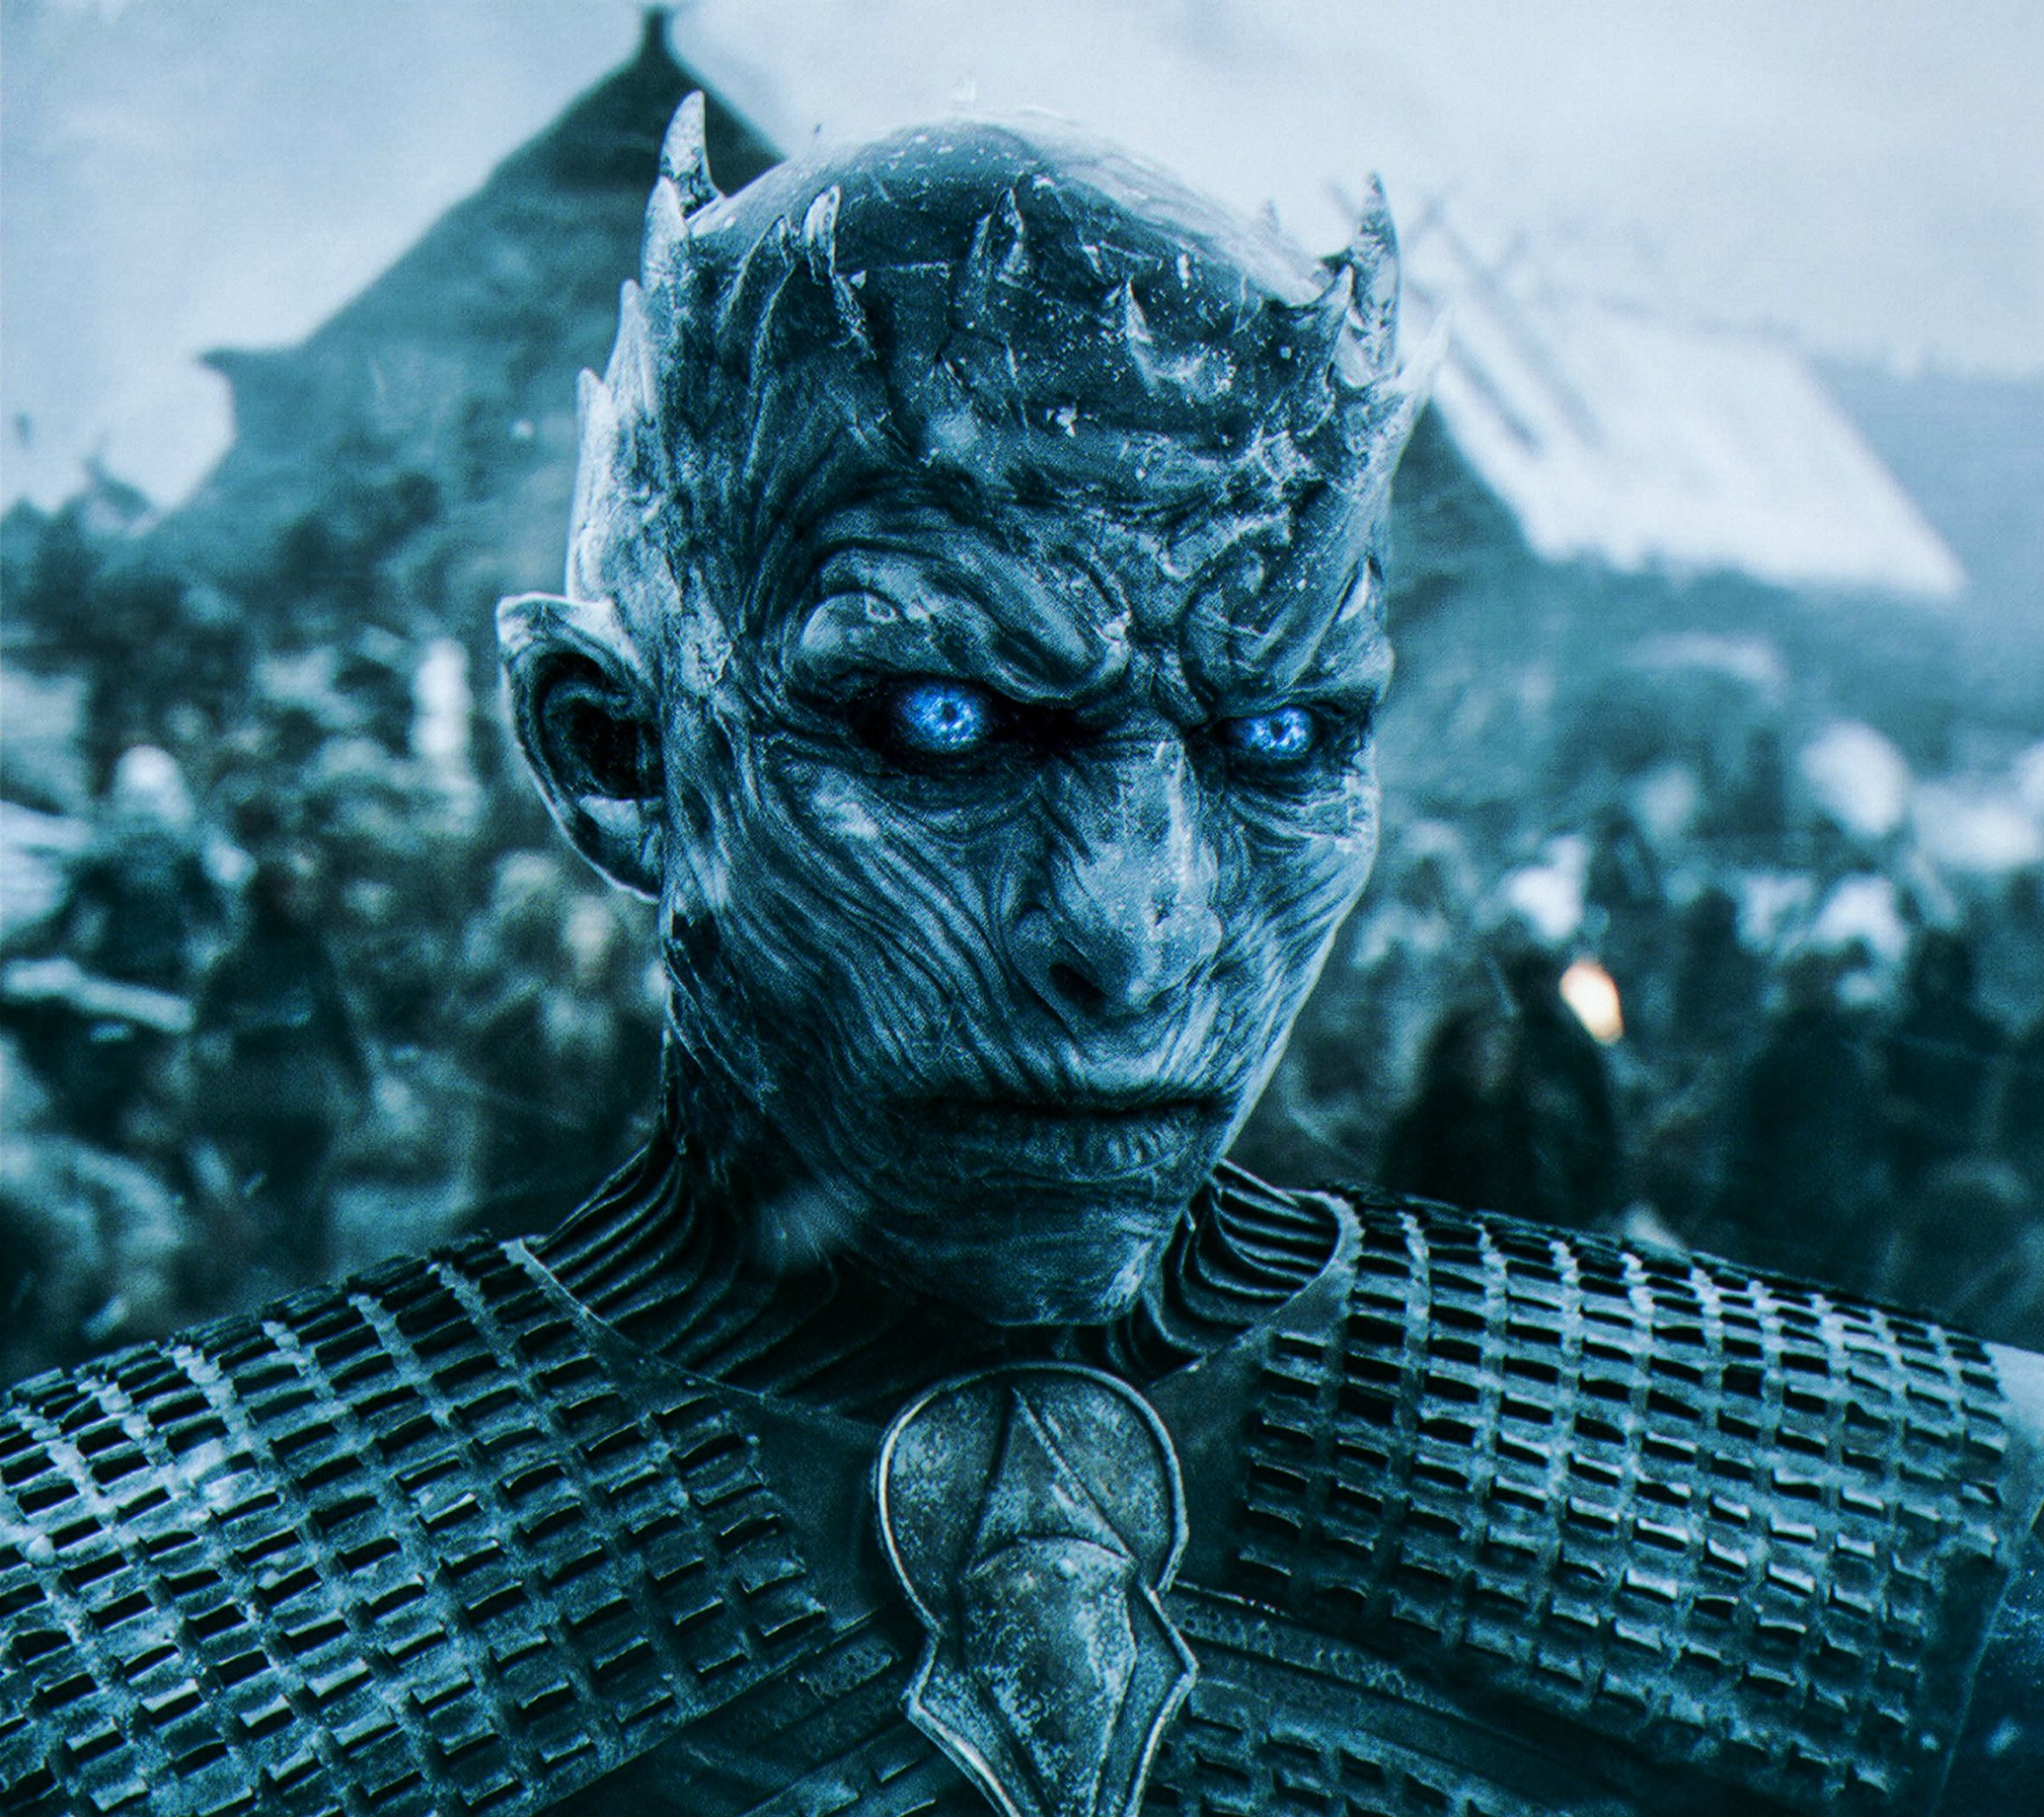 white walker, game of thrones, tv show, night king (game of thrones)